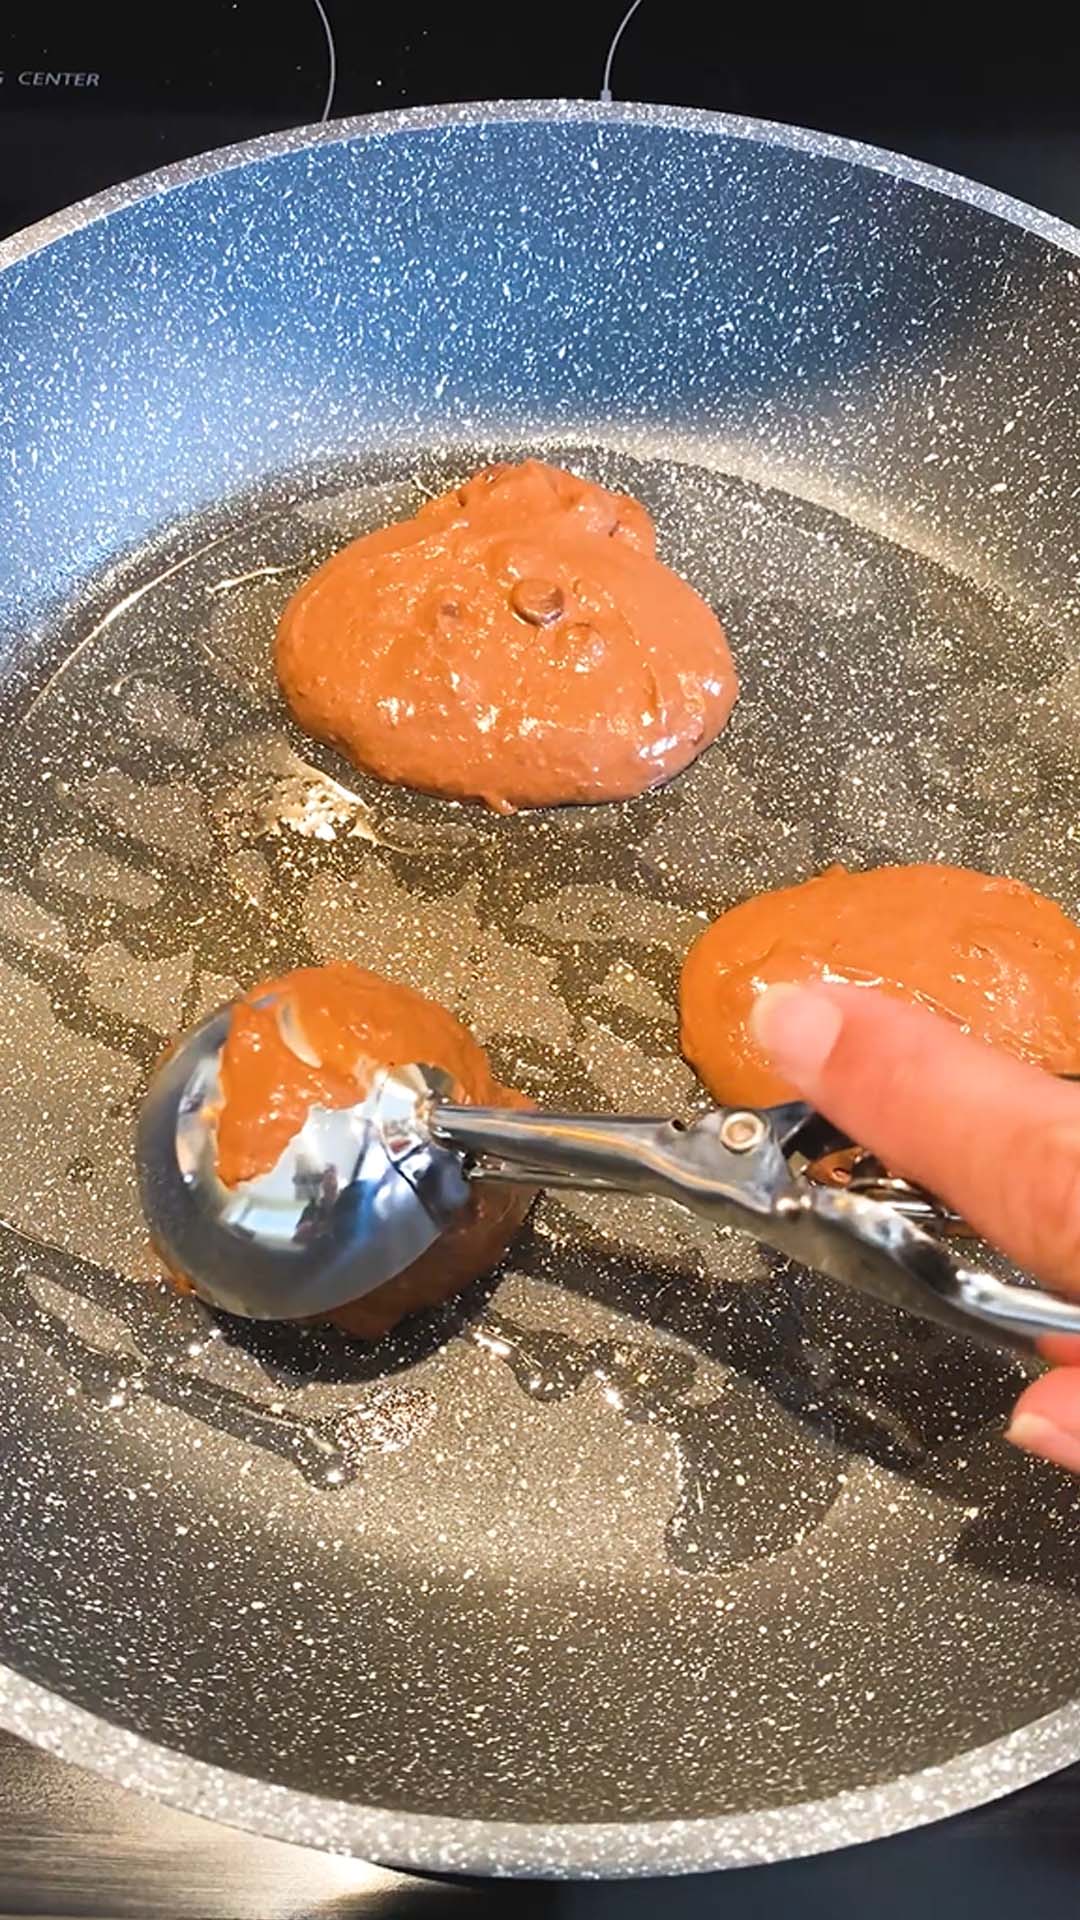 Dropping pancake batter into a skillet with a cookie scoop.